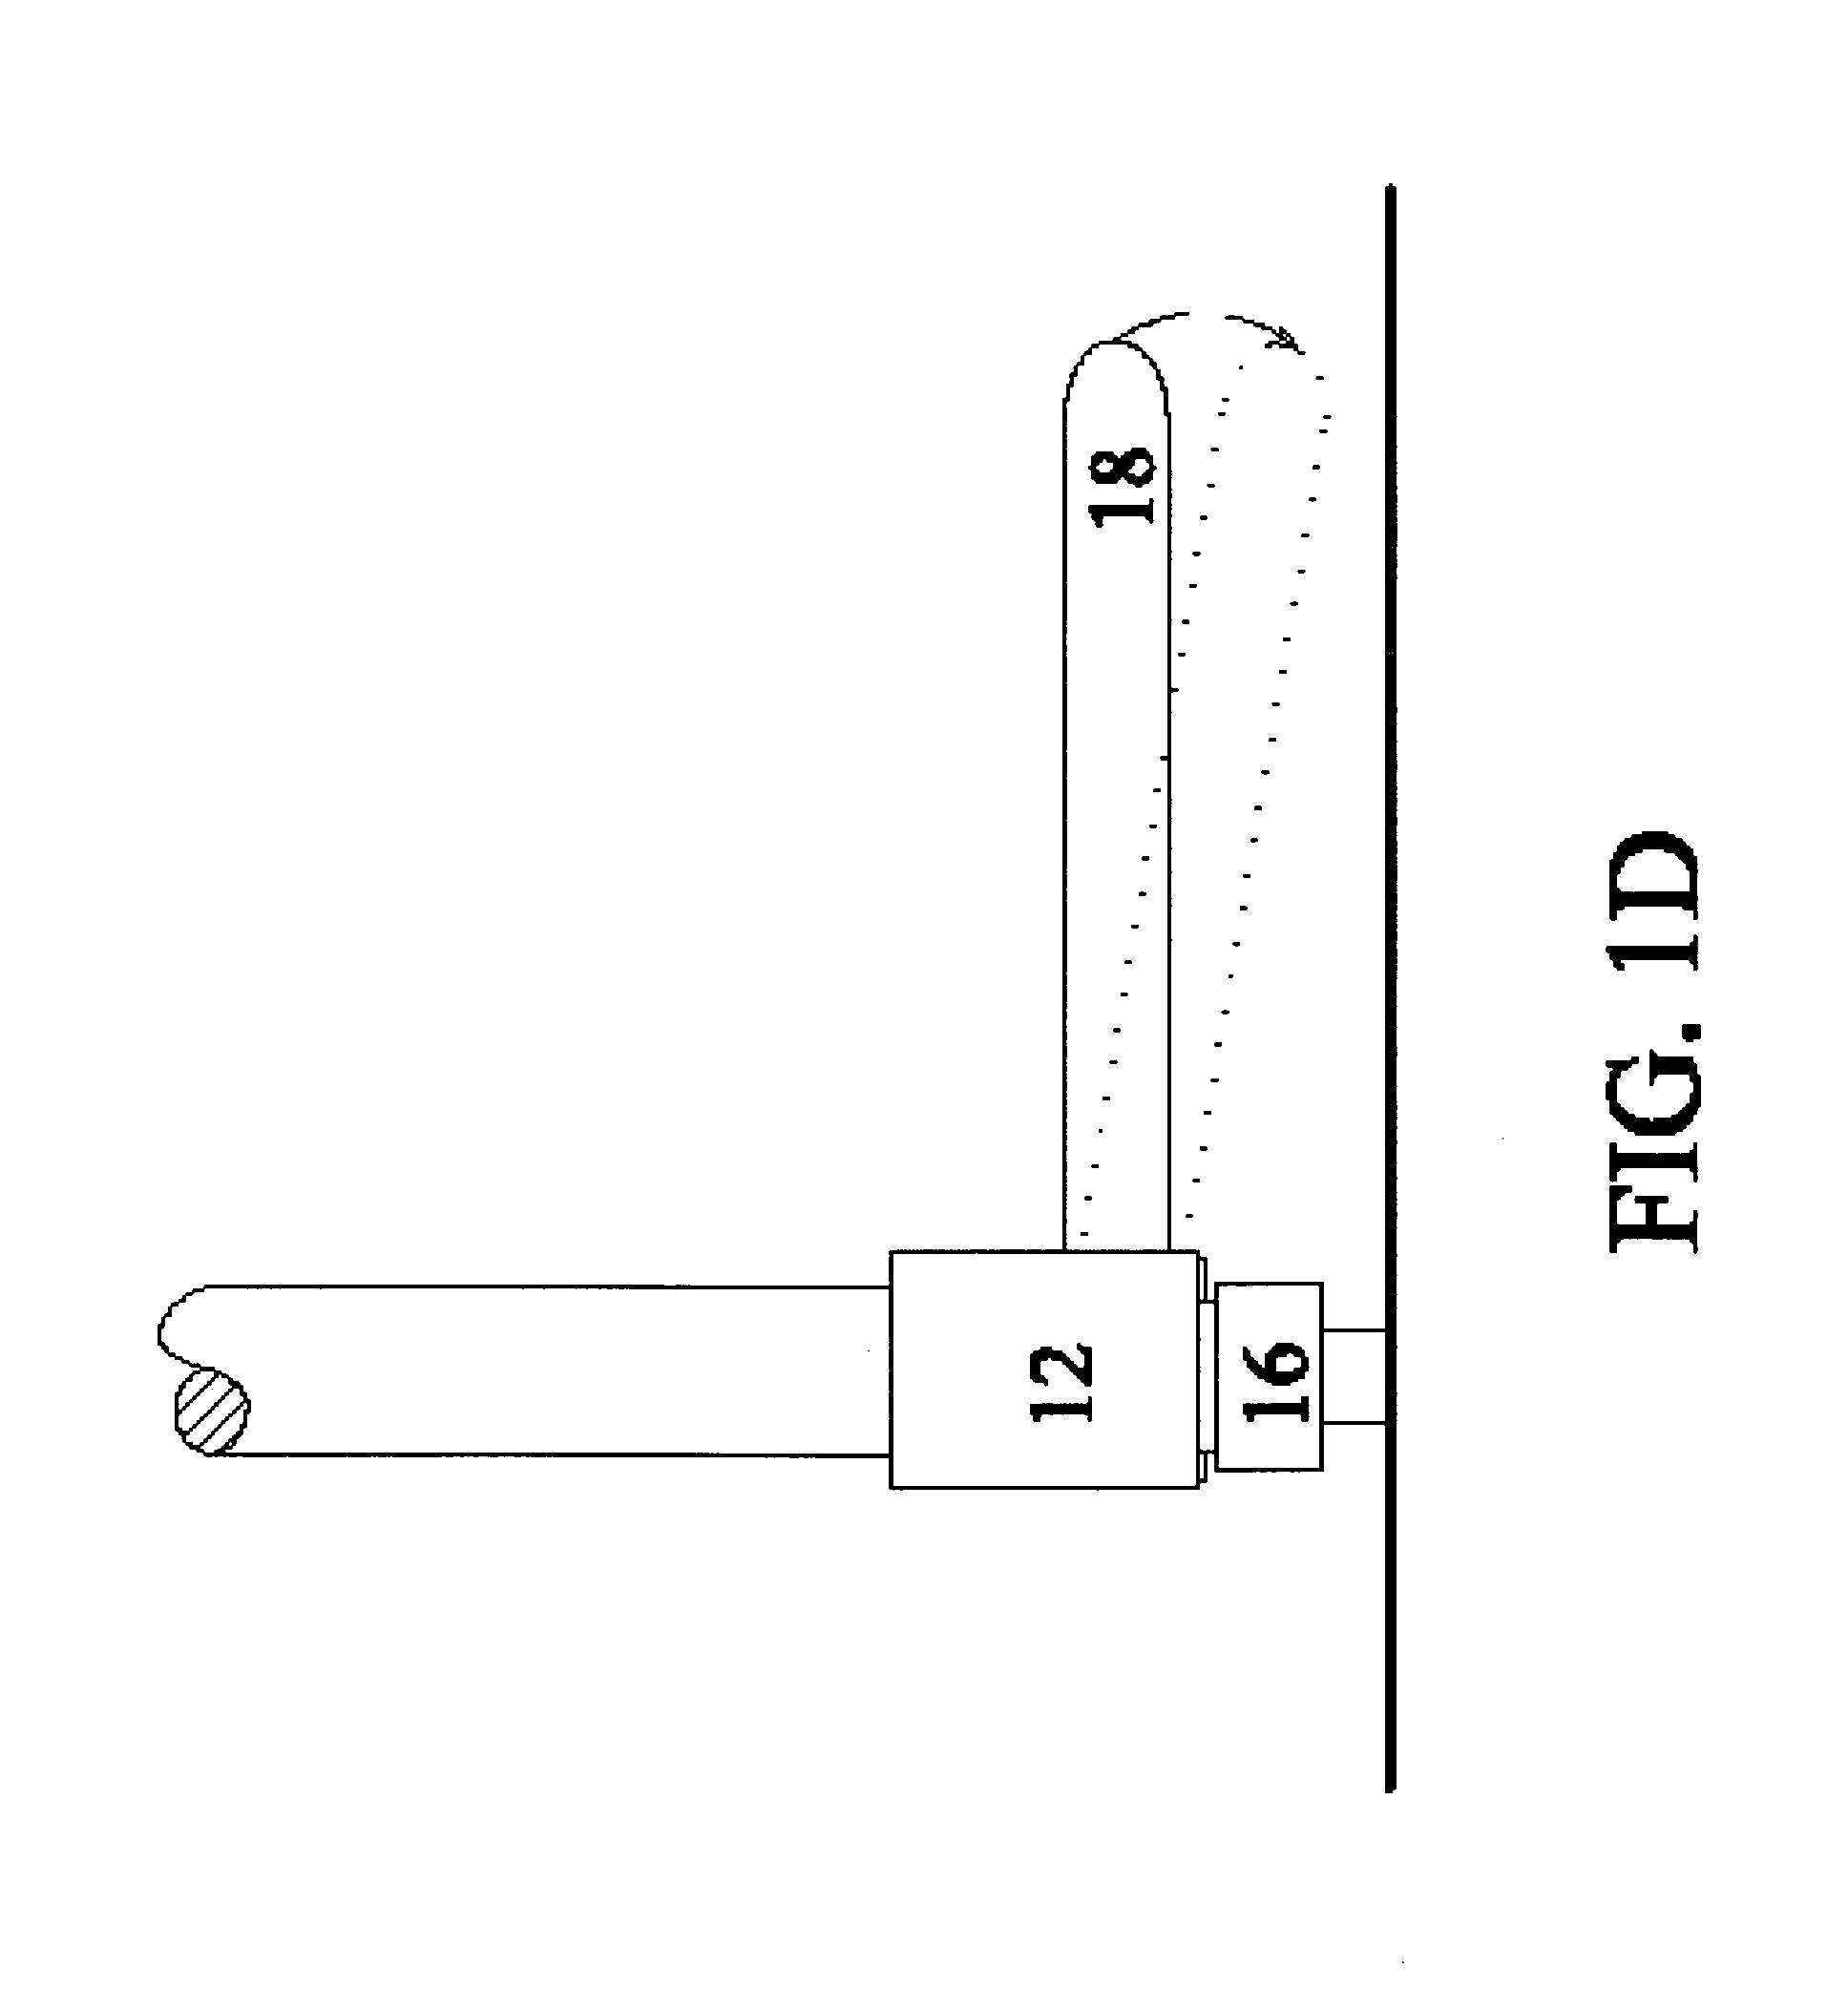 Walking aid device and method of using same